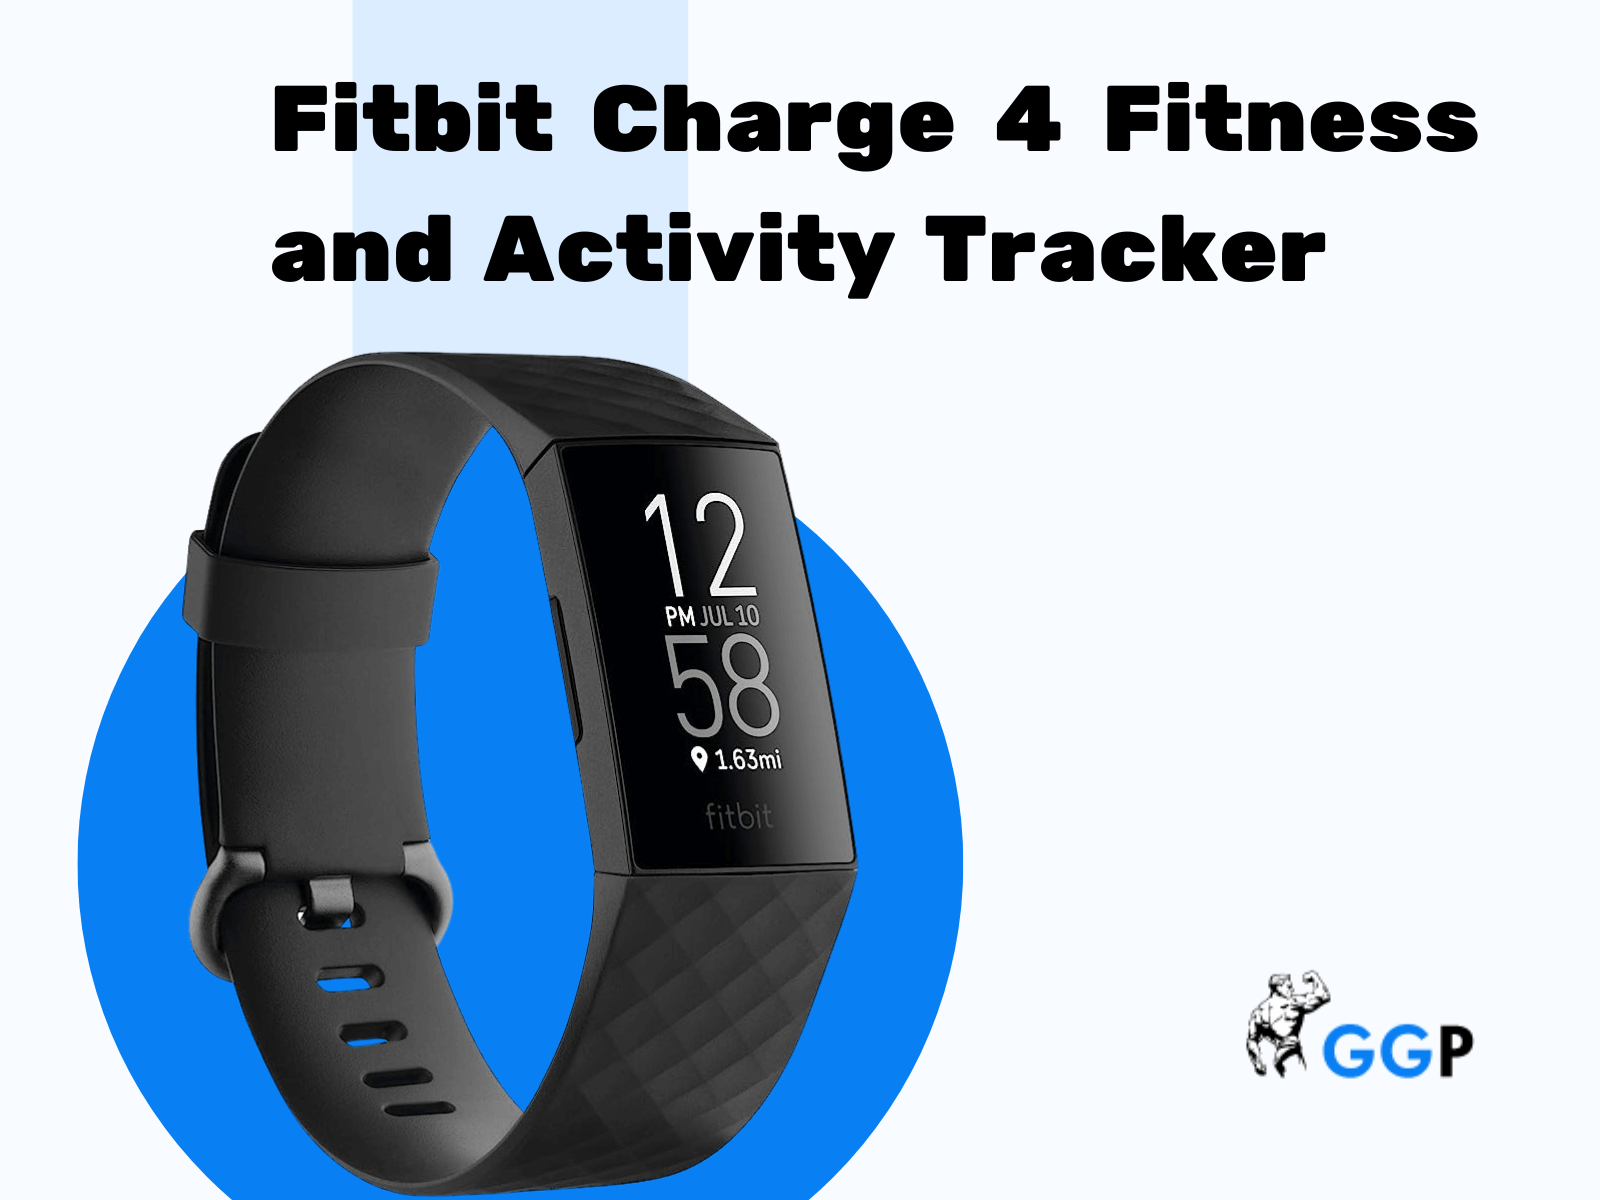 FitBit Charge 4 Fitness Activity Tracker